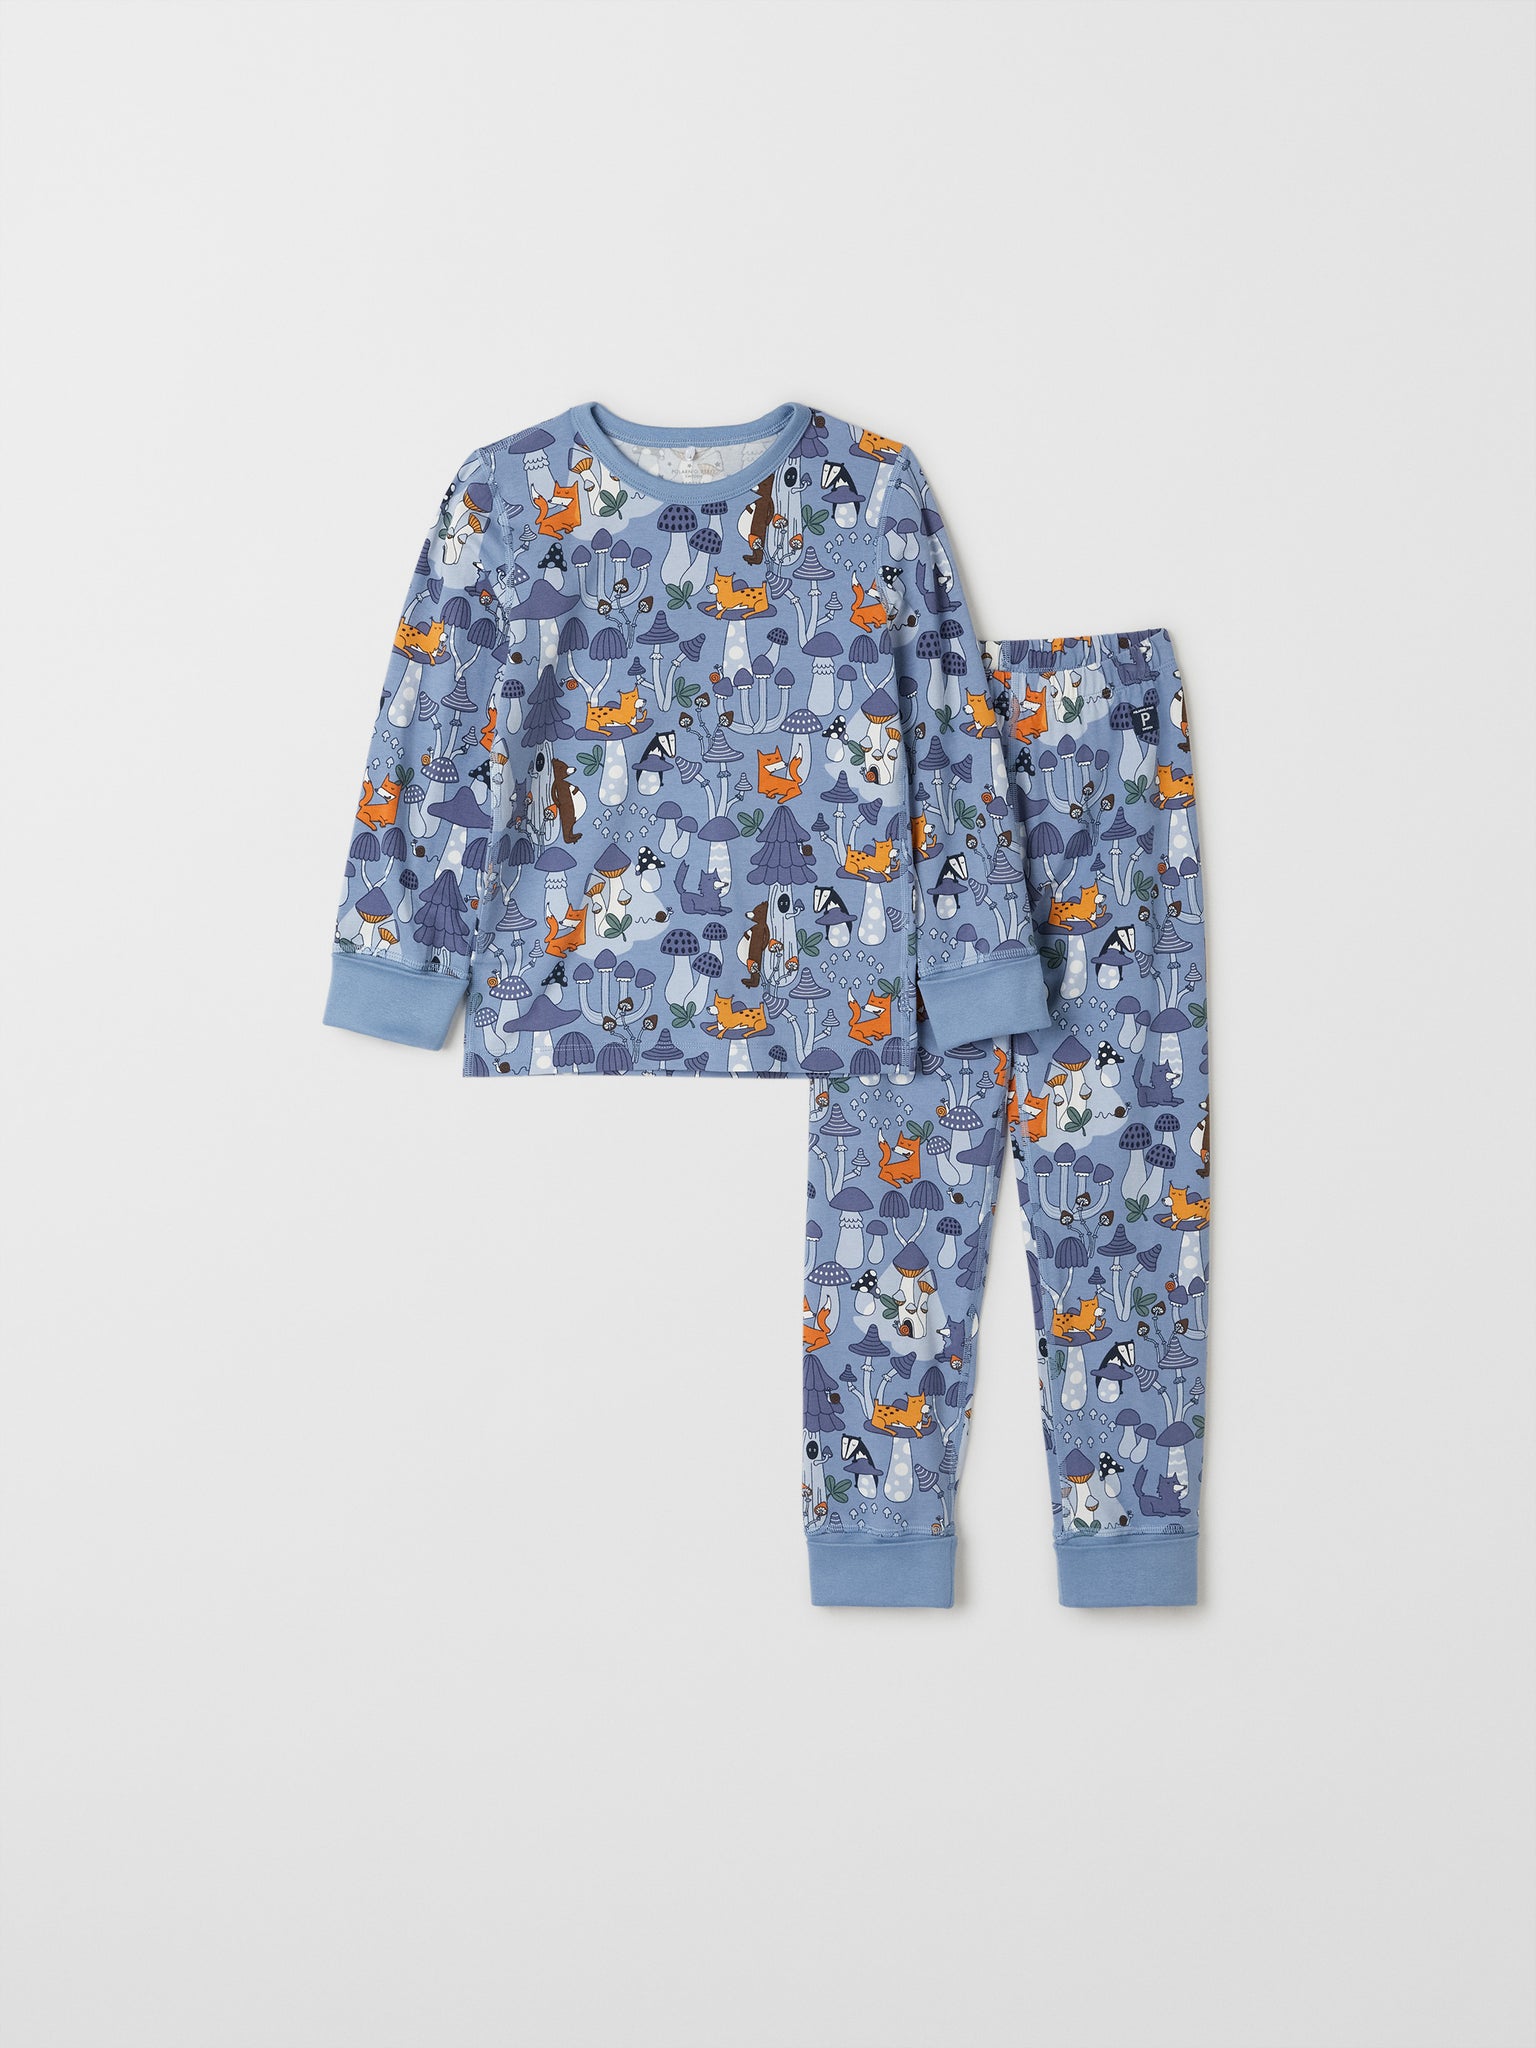 Nordic Forest Kids Blue Pyjamas from the Polarn O. Pyret kids collection. The best ethical kids clothes